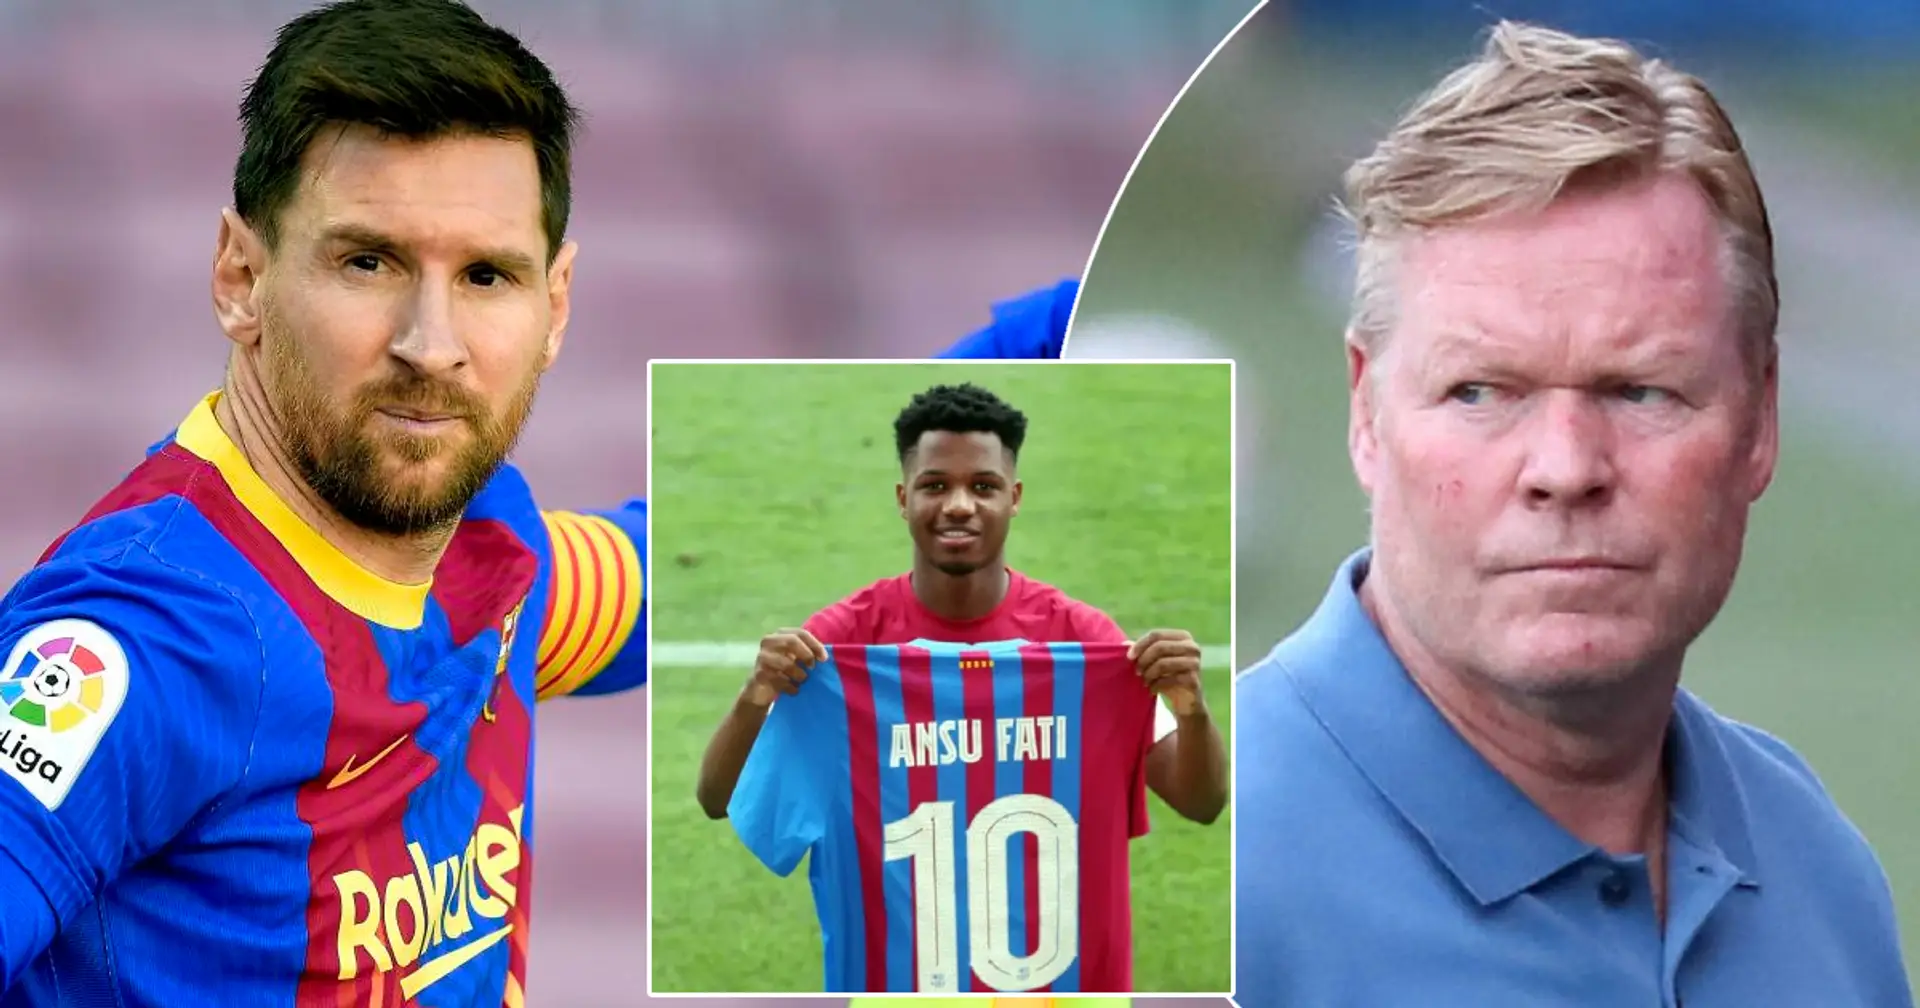 Barca's predicted XI without Leo Messi from 2020 -- how it compares to current one